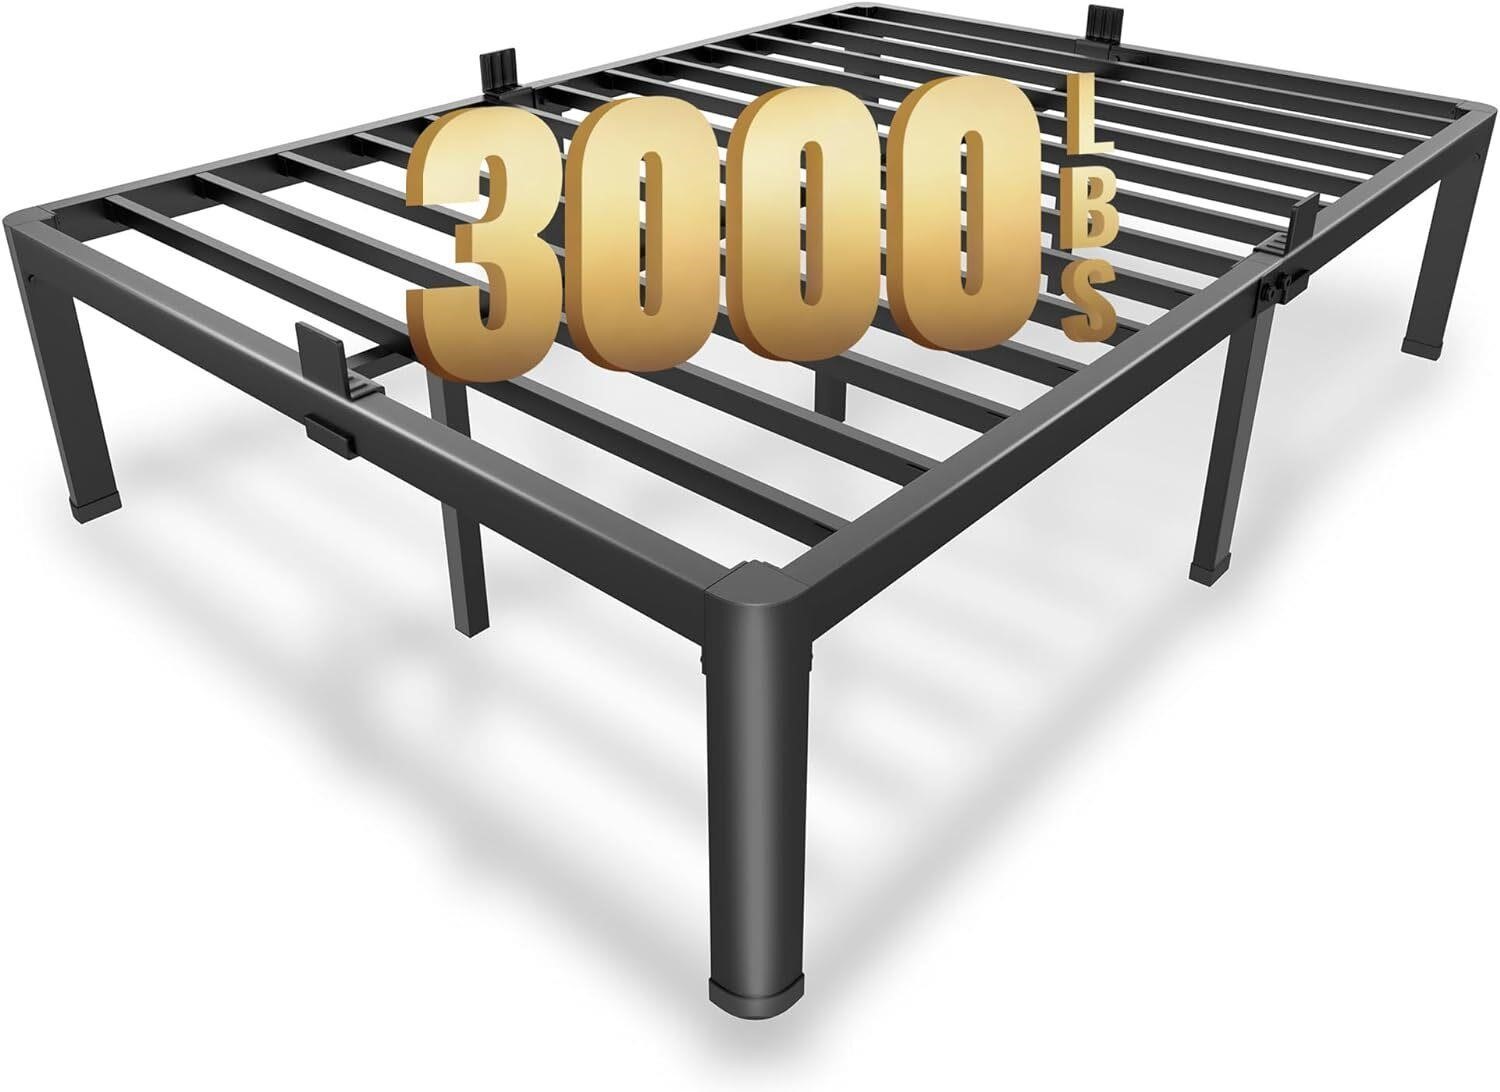 12 Inch Full Size Metal Platform Bed Frame with Ro